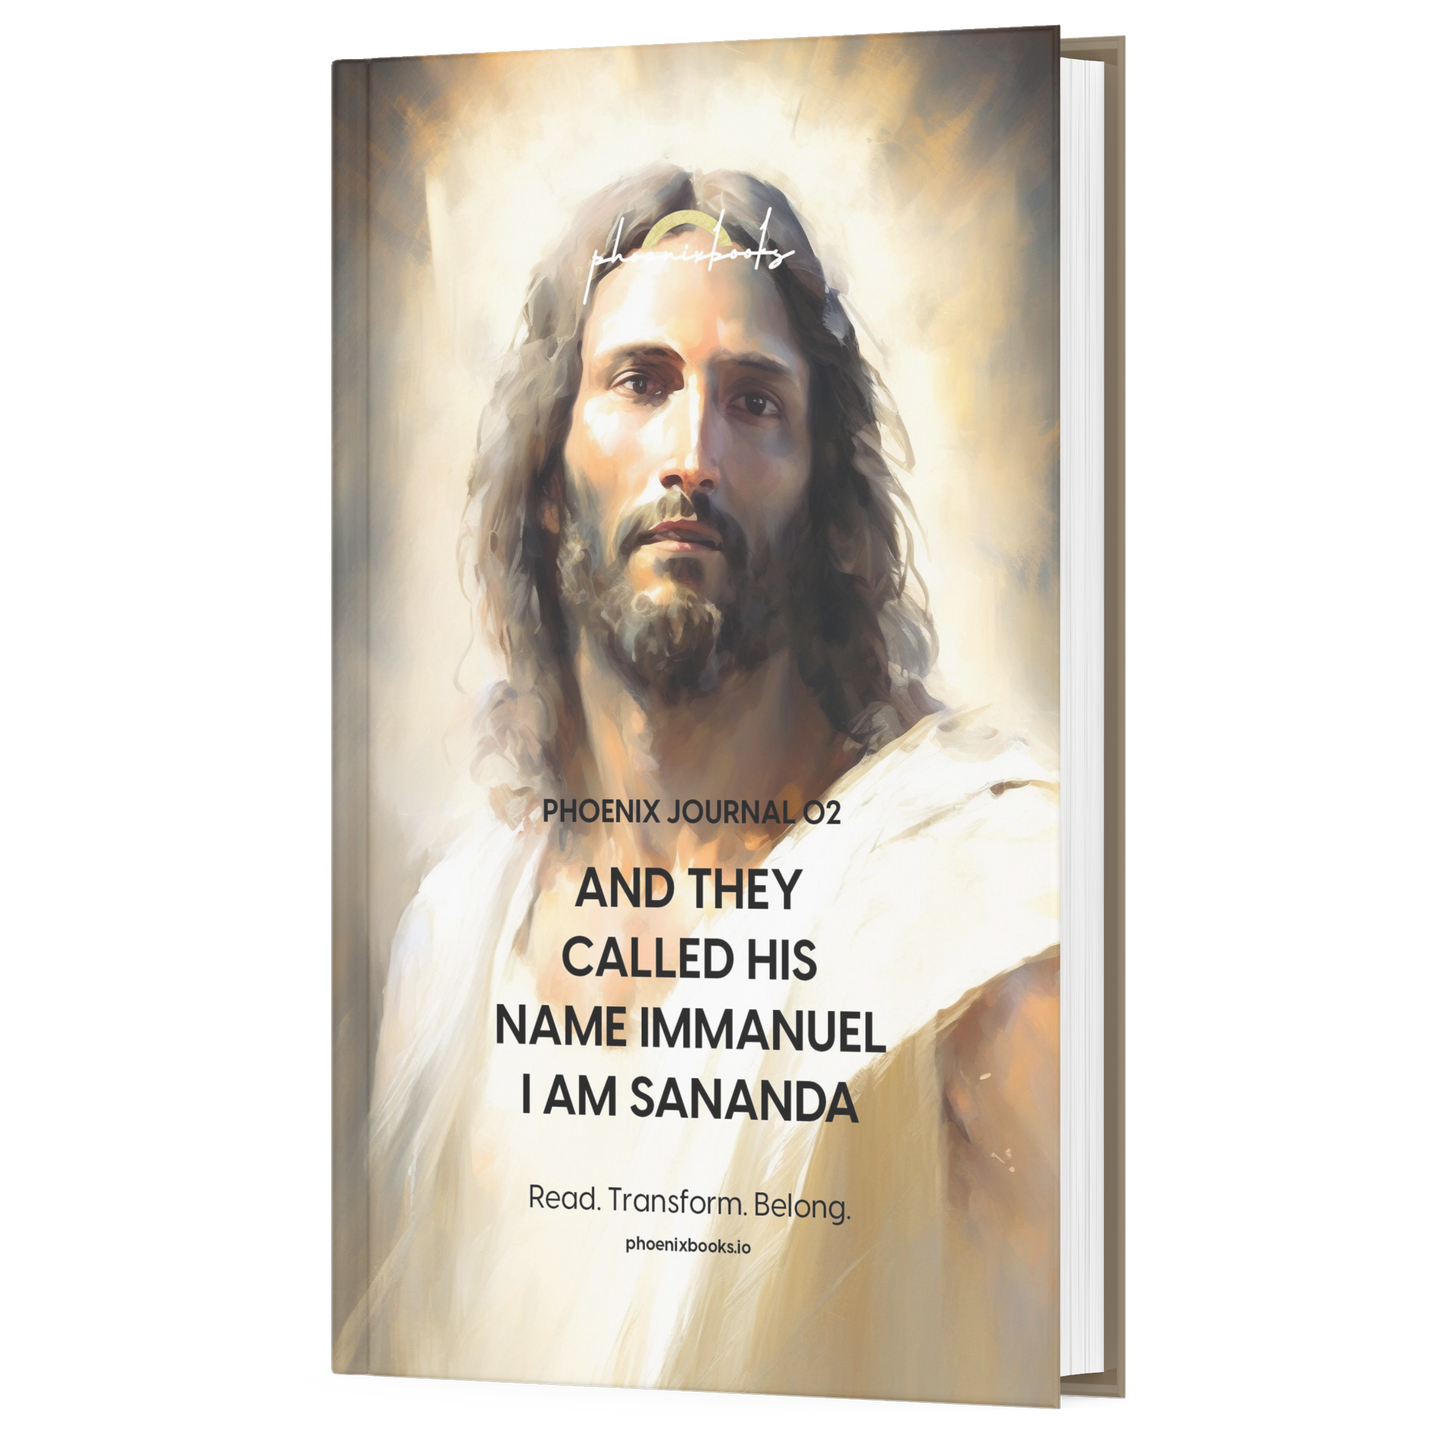 PHOENIX JOURNAL 02 - AND THEY CALLED HIS NAME IMMANUEL I AM SANANDA (ENG)